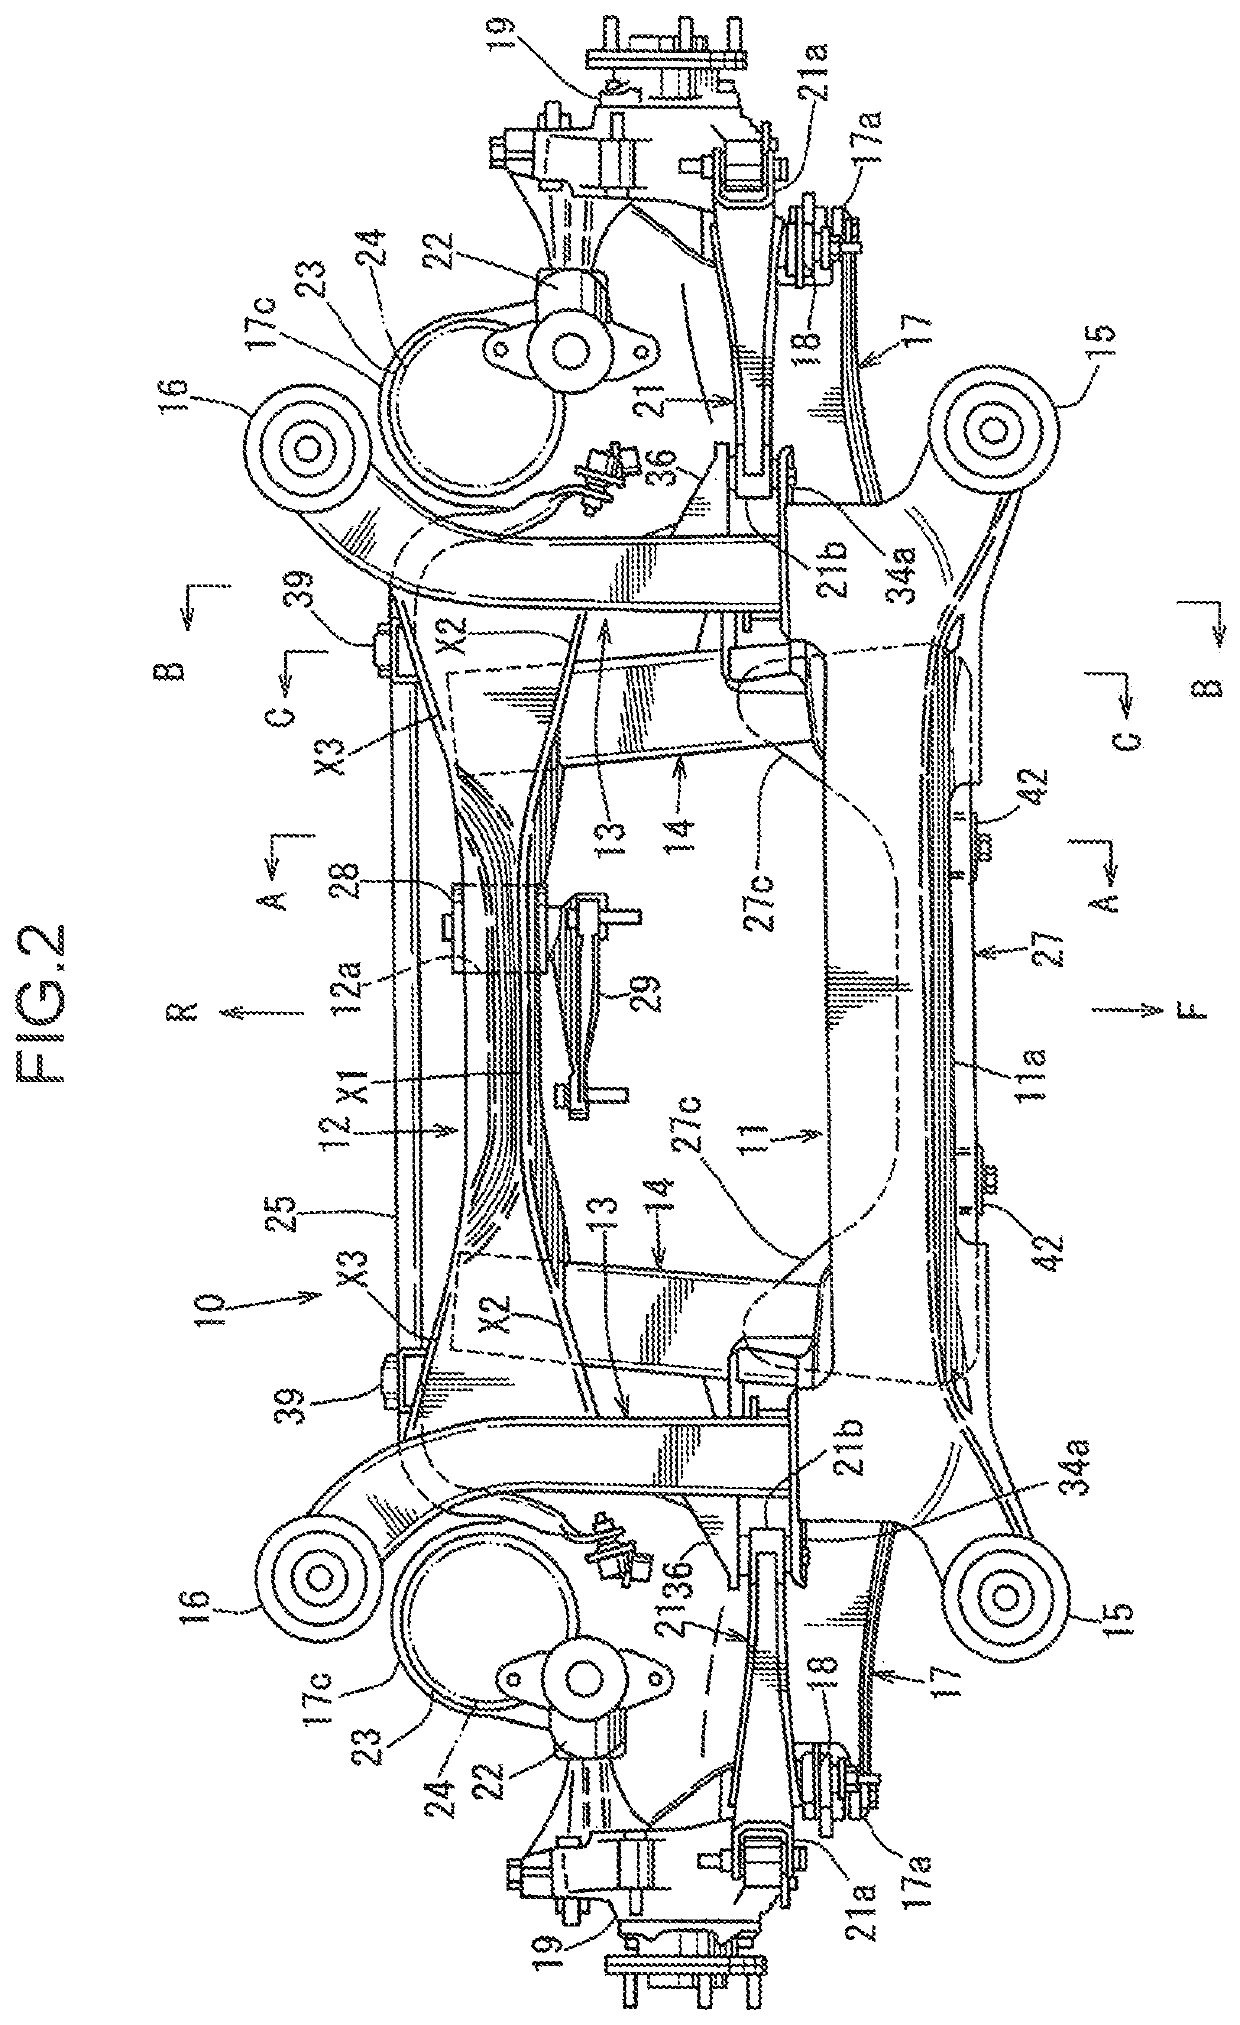 Rear subframe structure